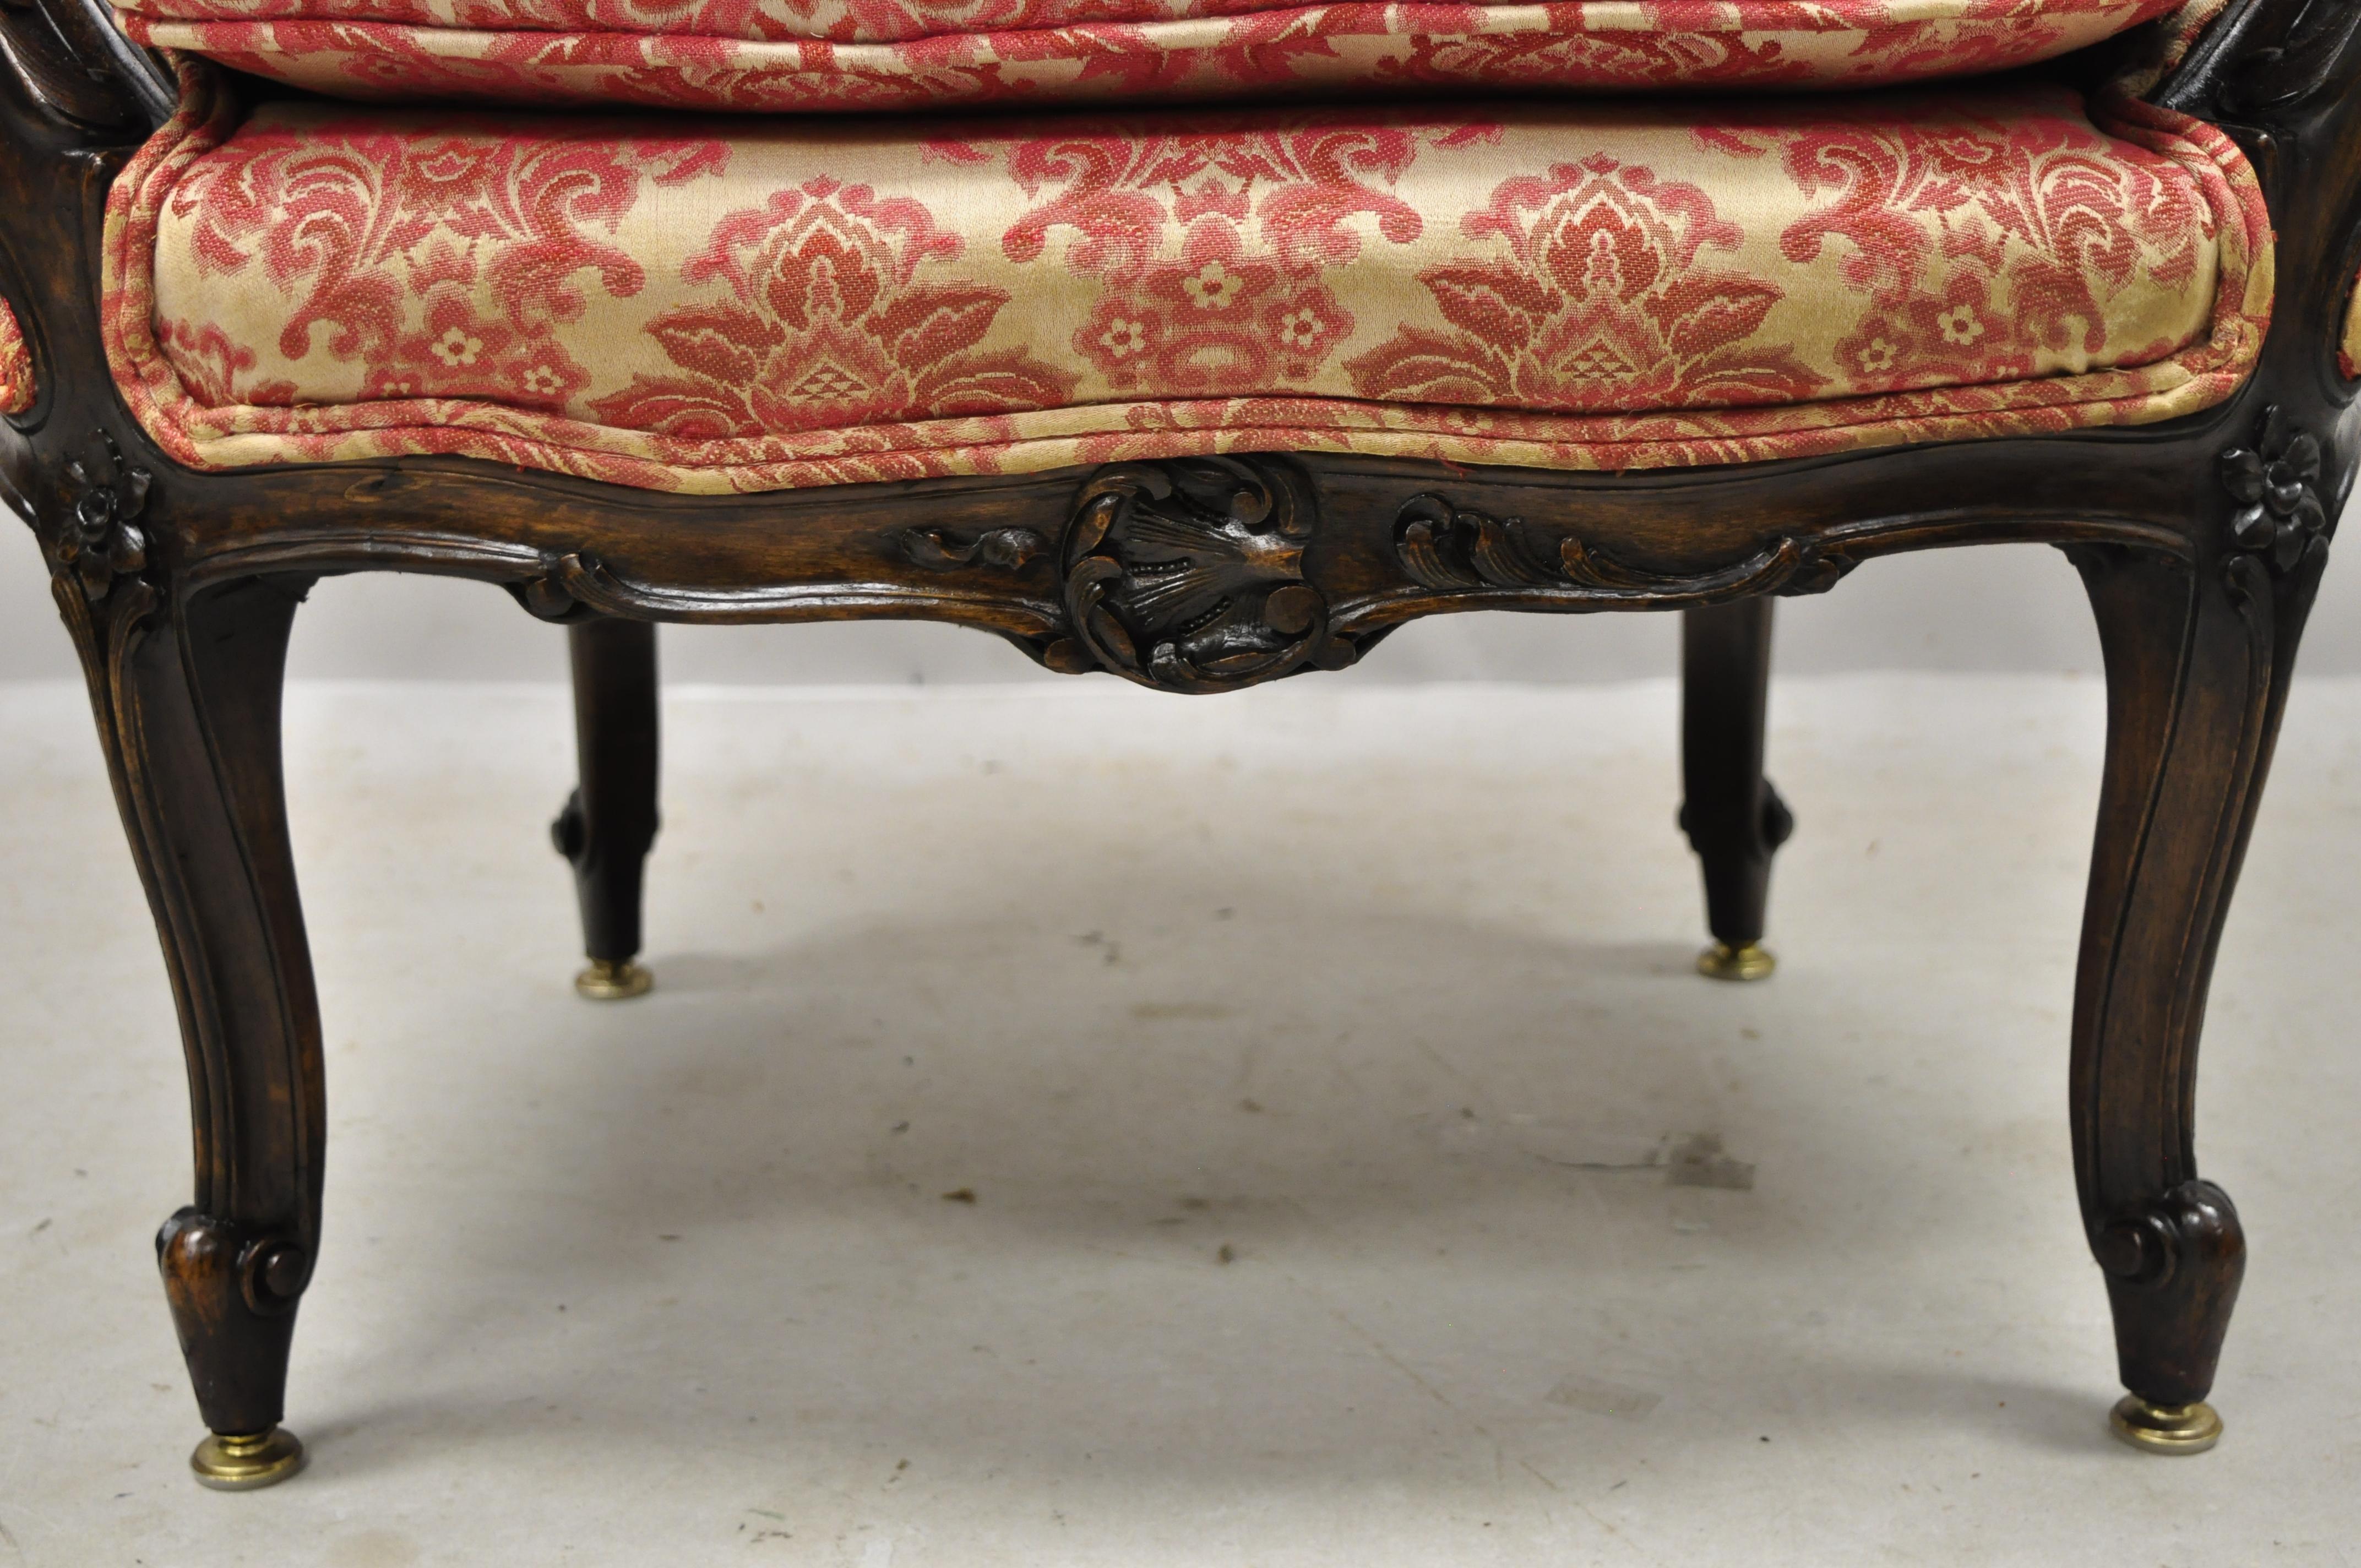 European Antique French Louis XV Provincial Walnut Upholstered Boudoir Accent Chair